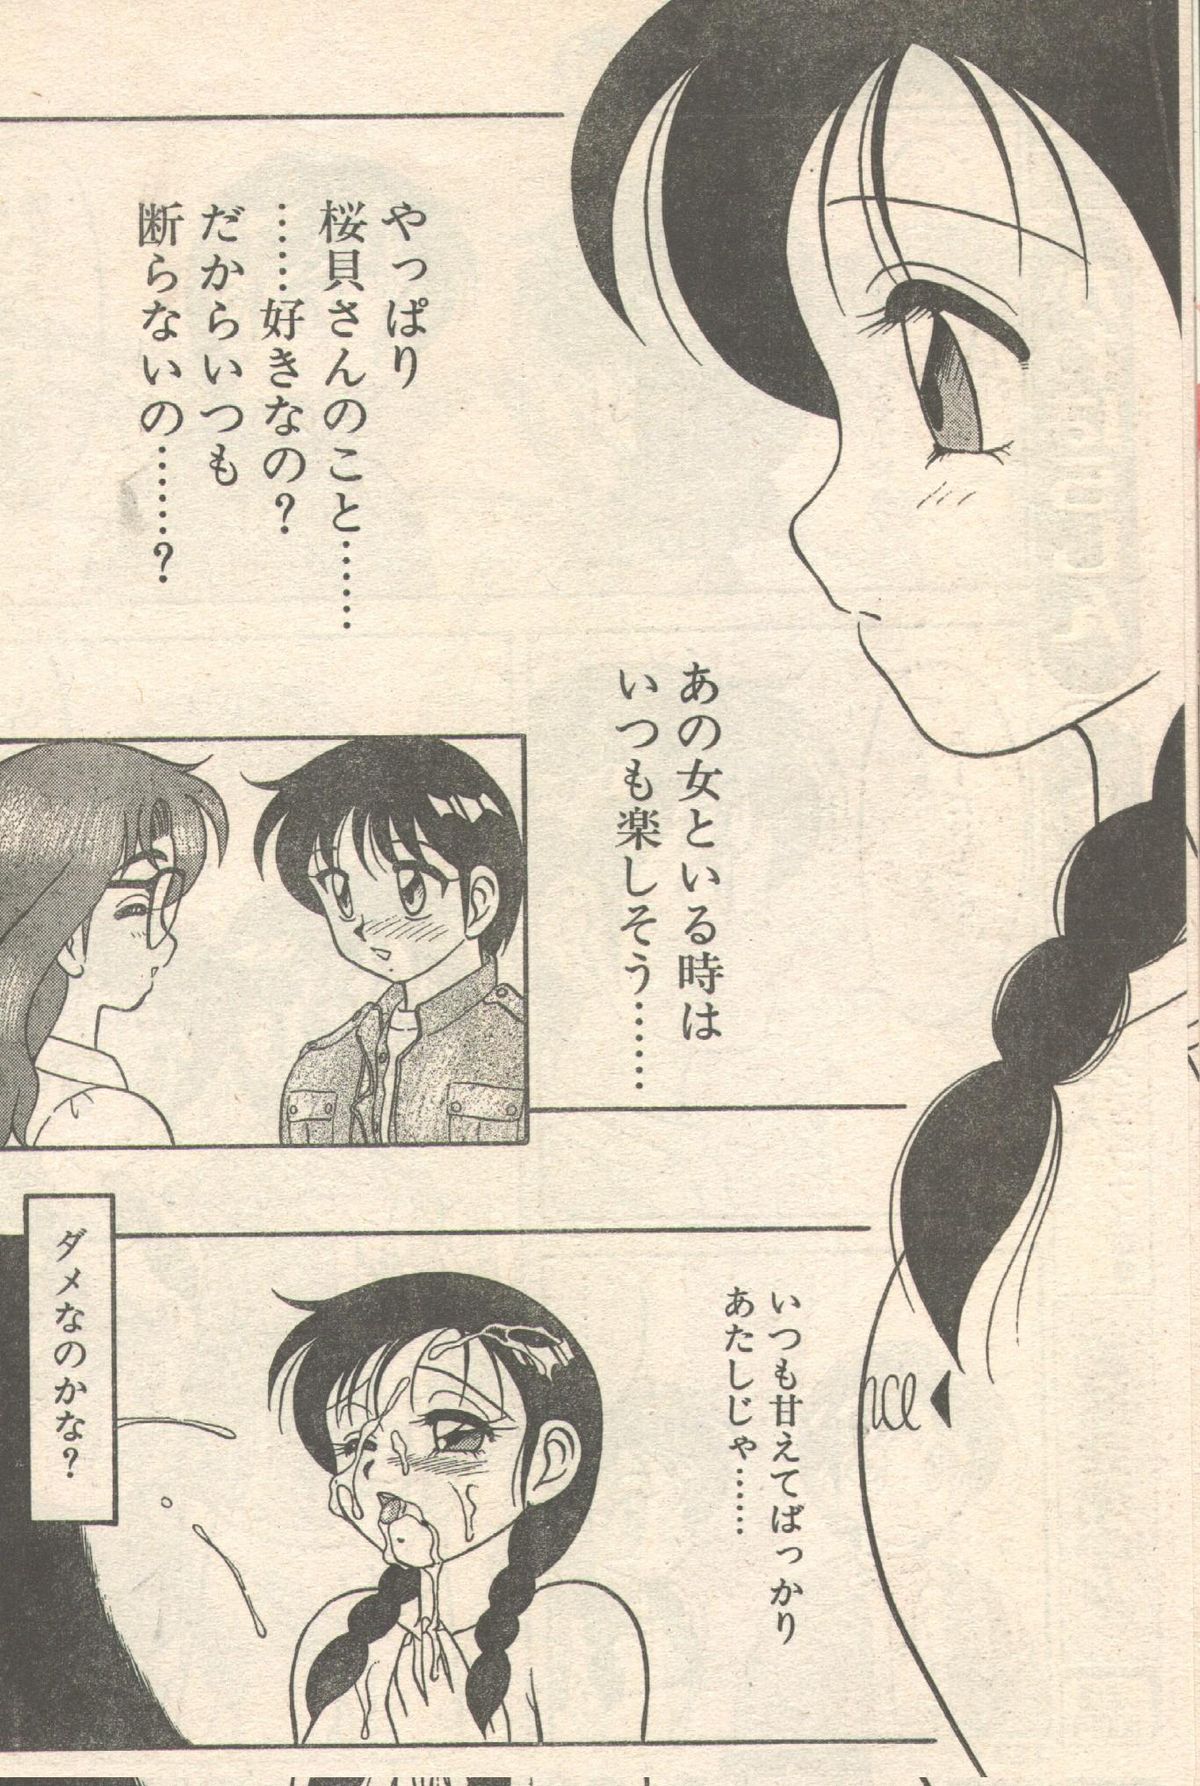 Candy Time 1992-06 [Incomplete] キャンディータイム 1992年06月号 [不完全]